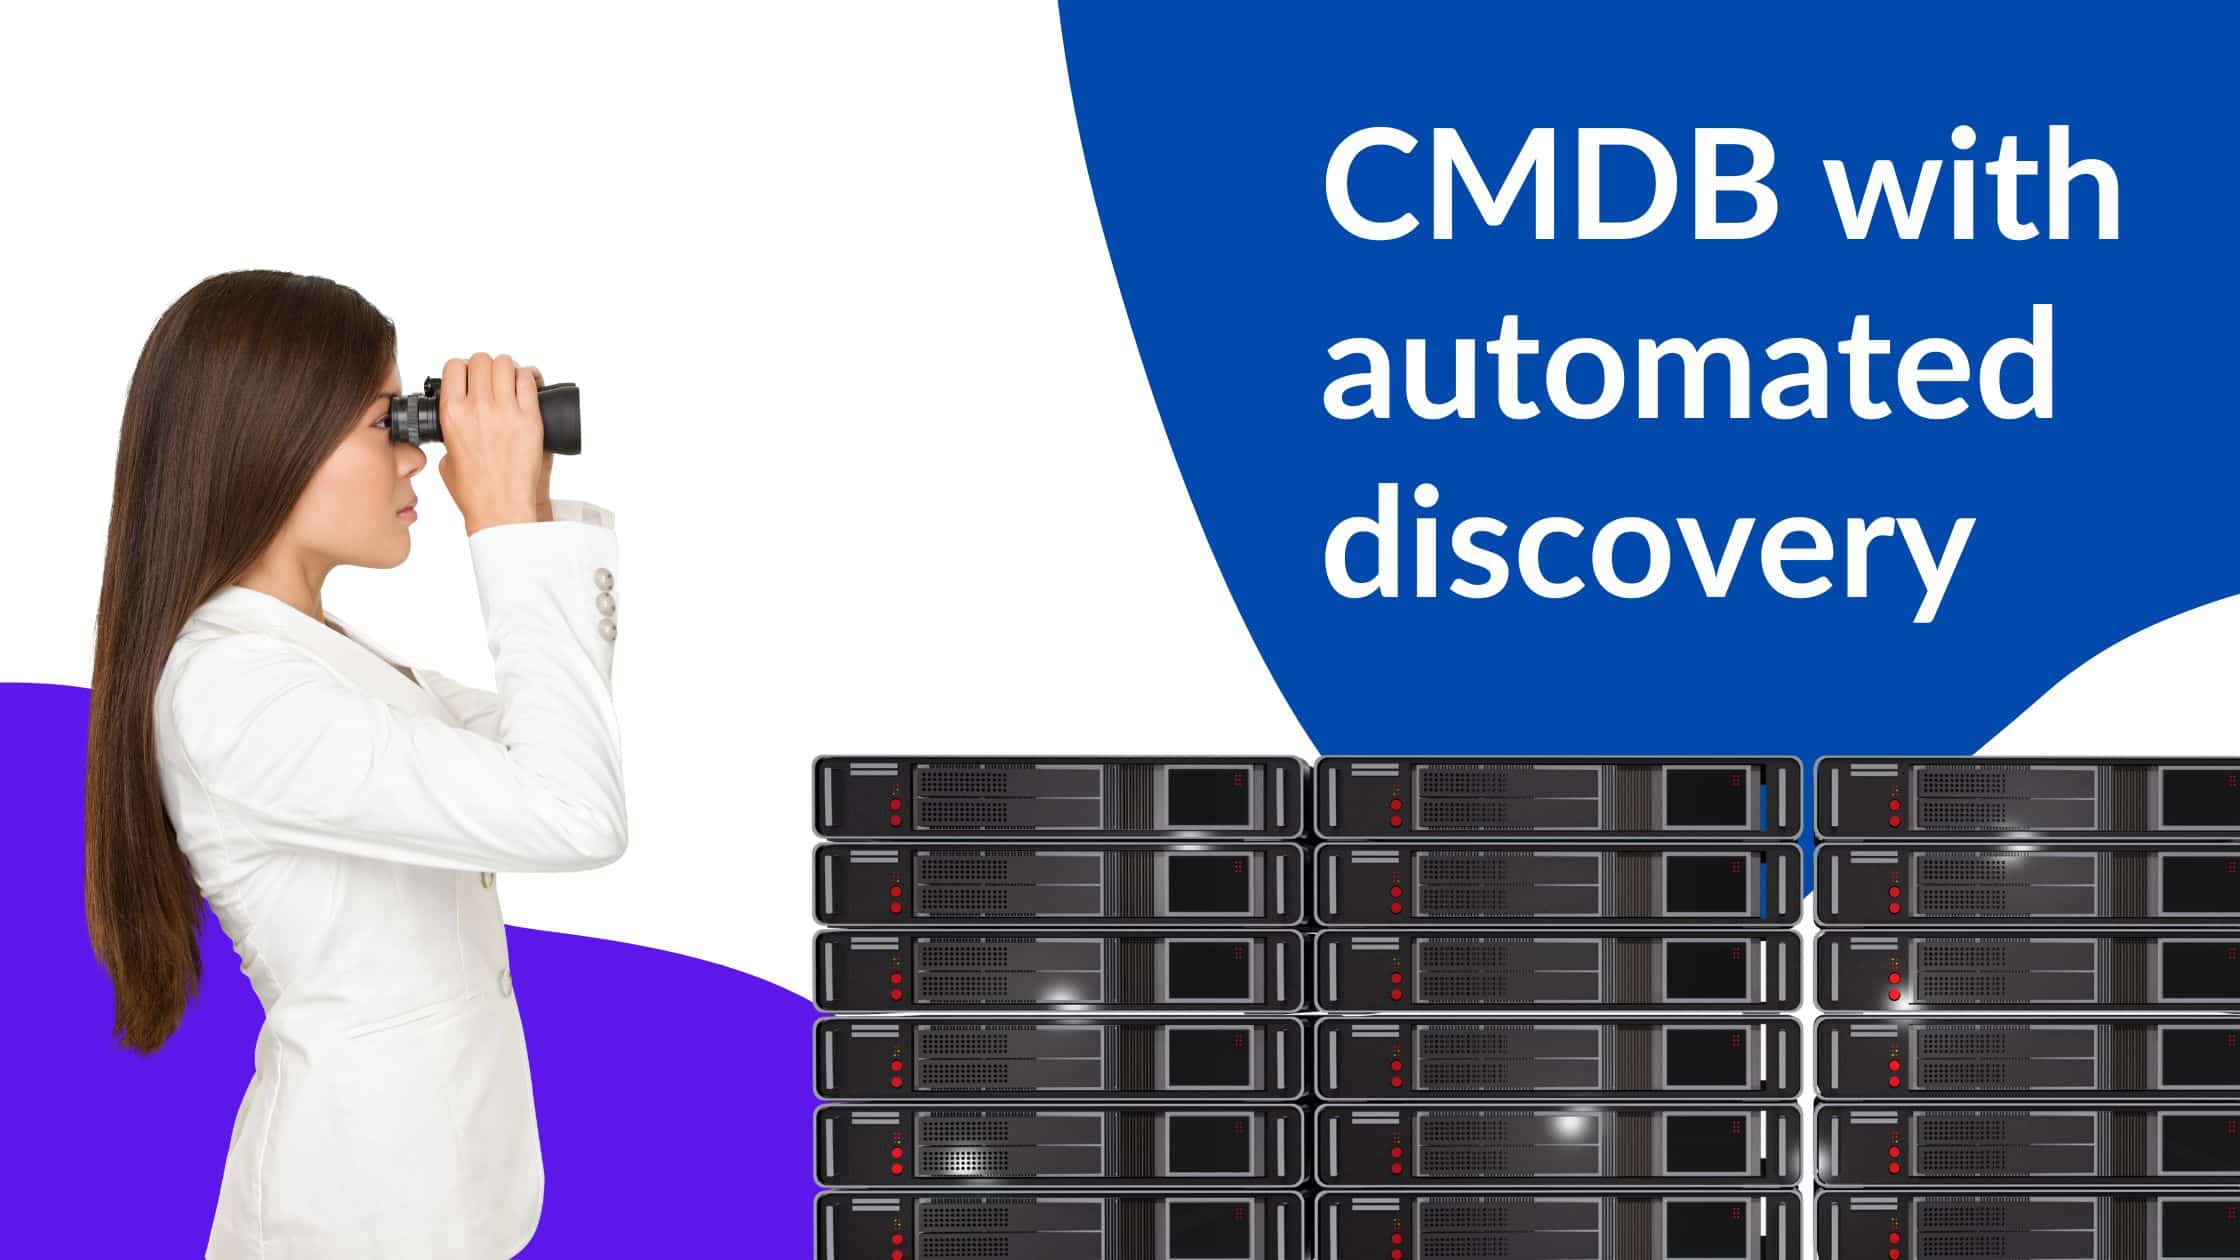 CMDB with automated discovery